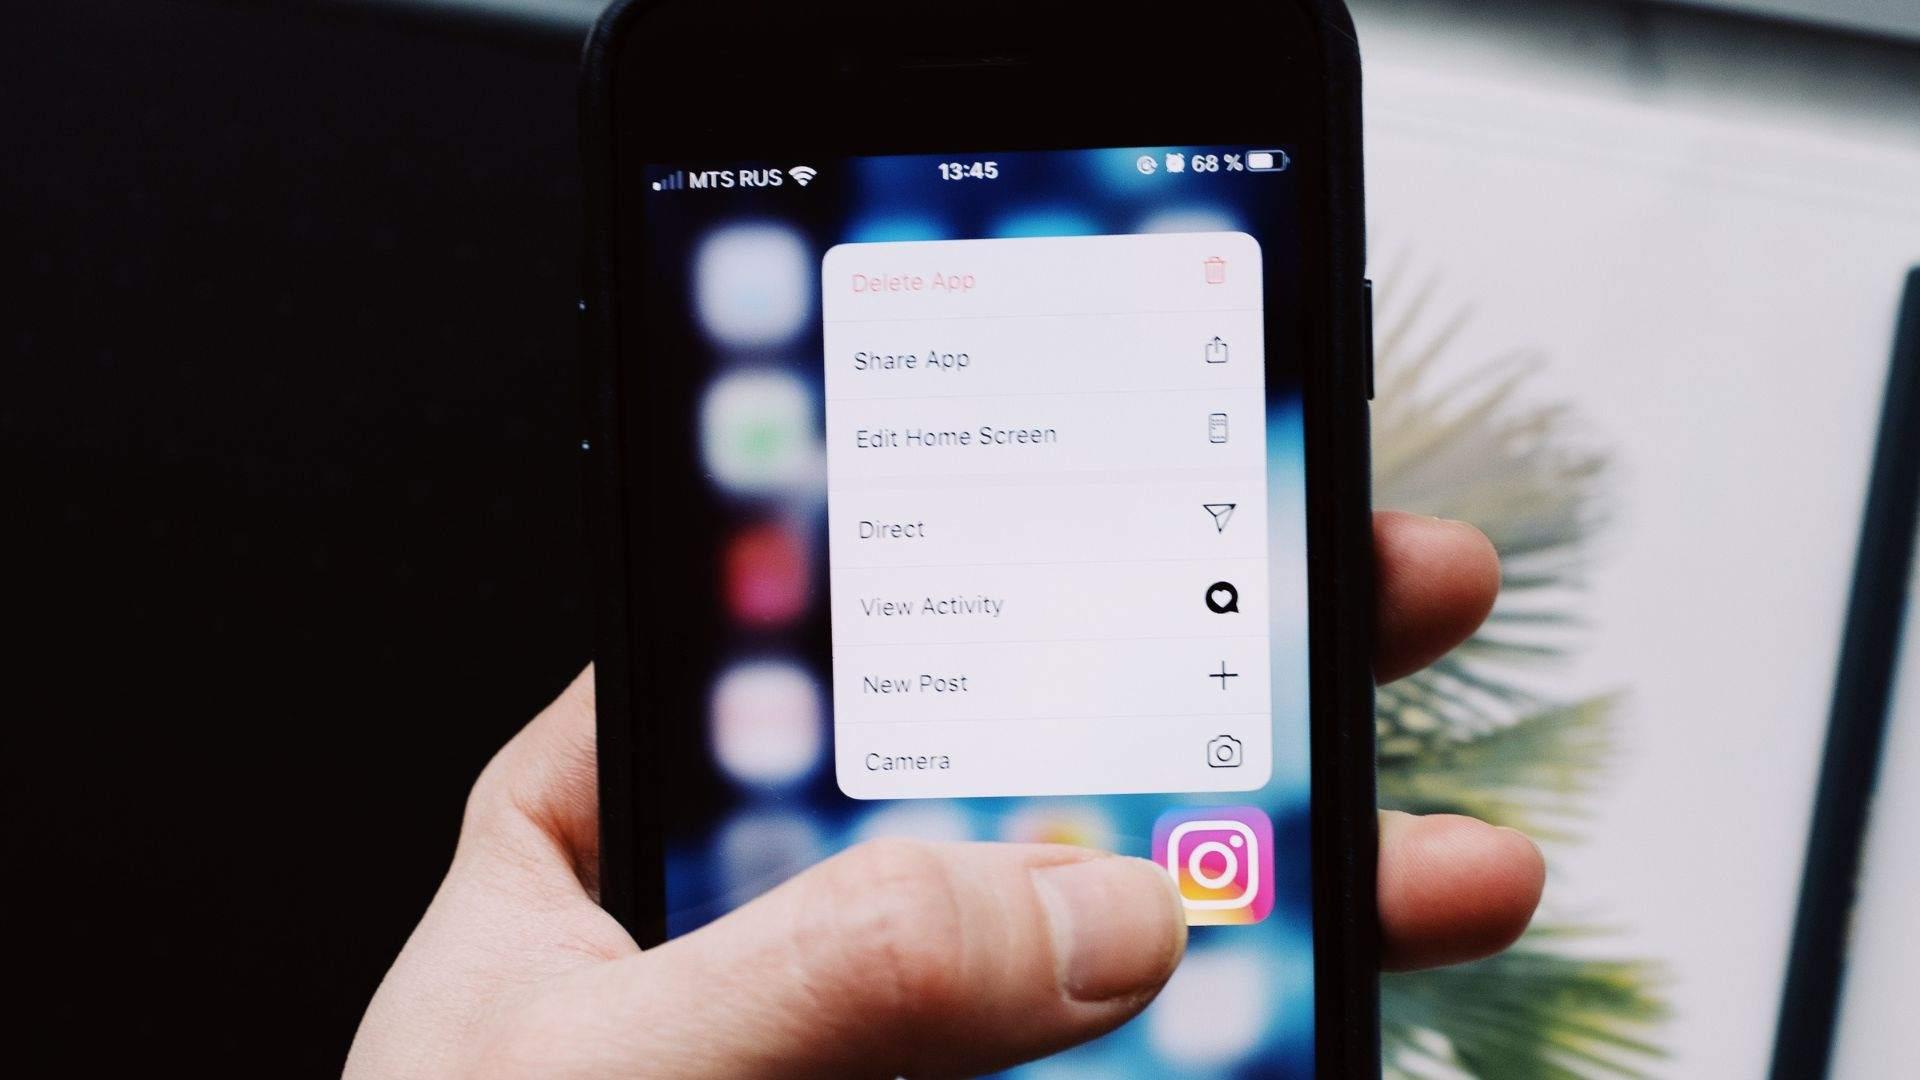 How to Find Instagram Followers in Order?